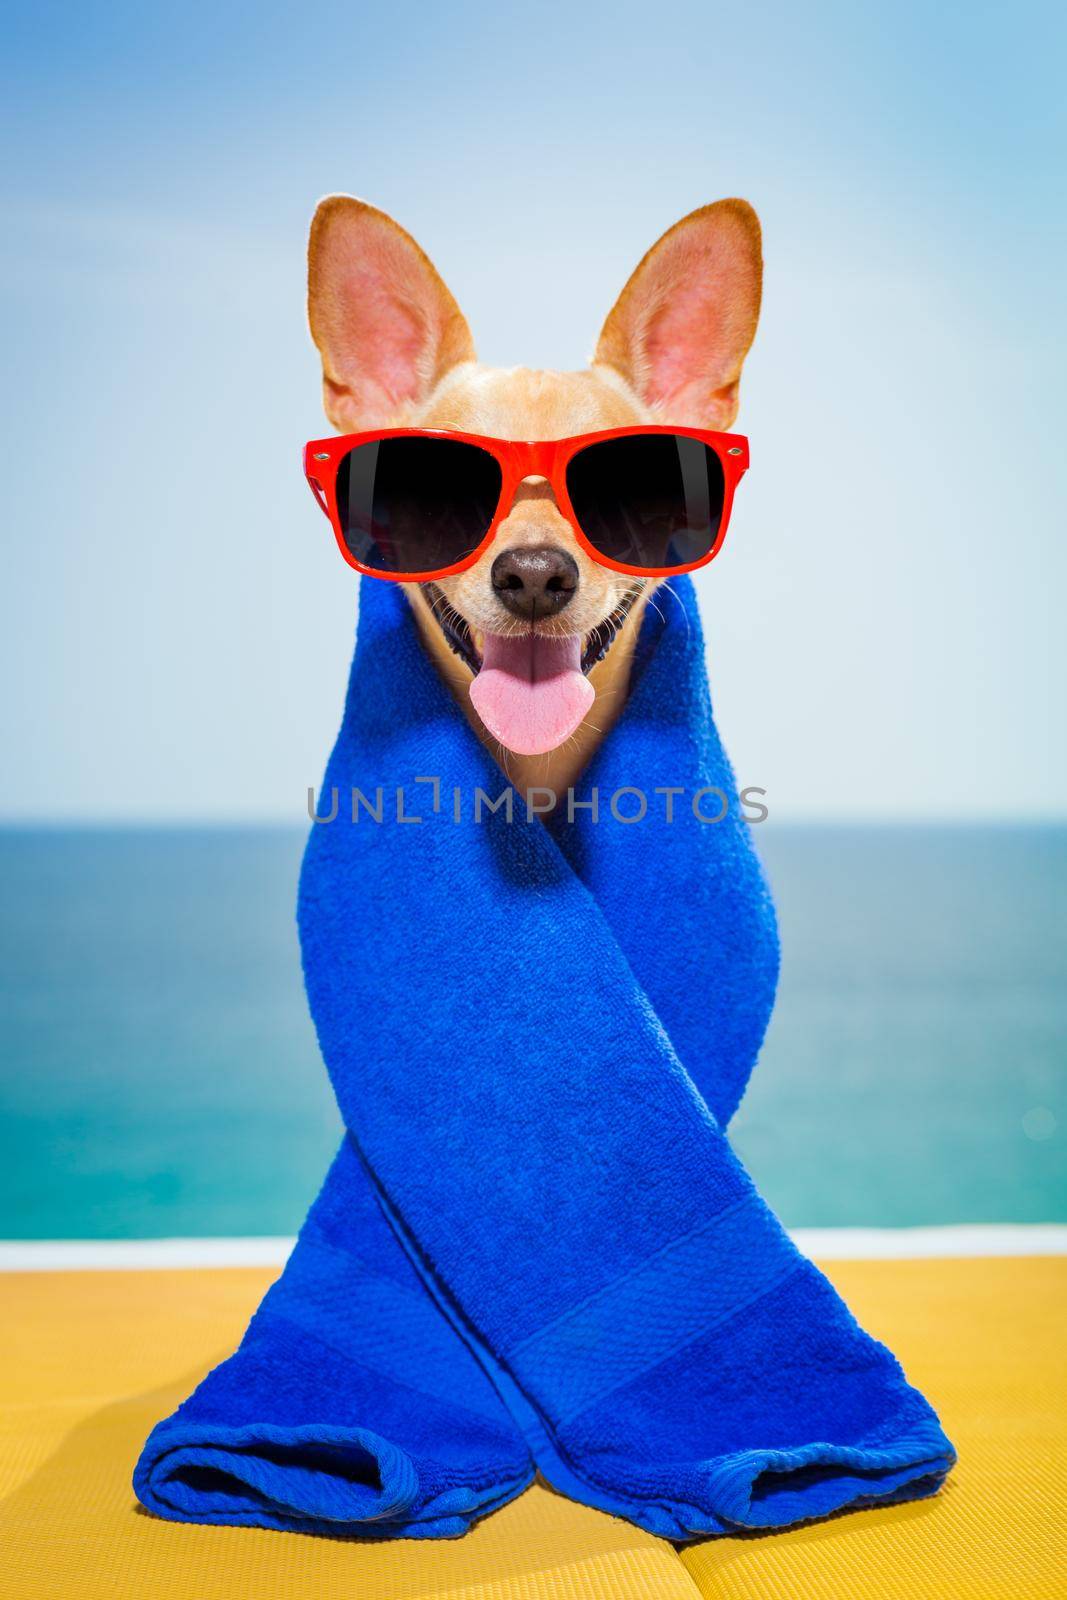 chihuahua dog at the beach having a wellness spa treatment wearing red funny sunglasses